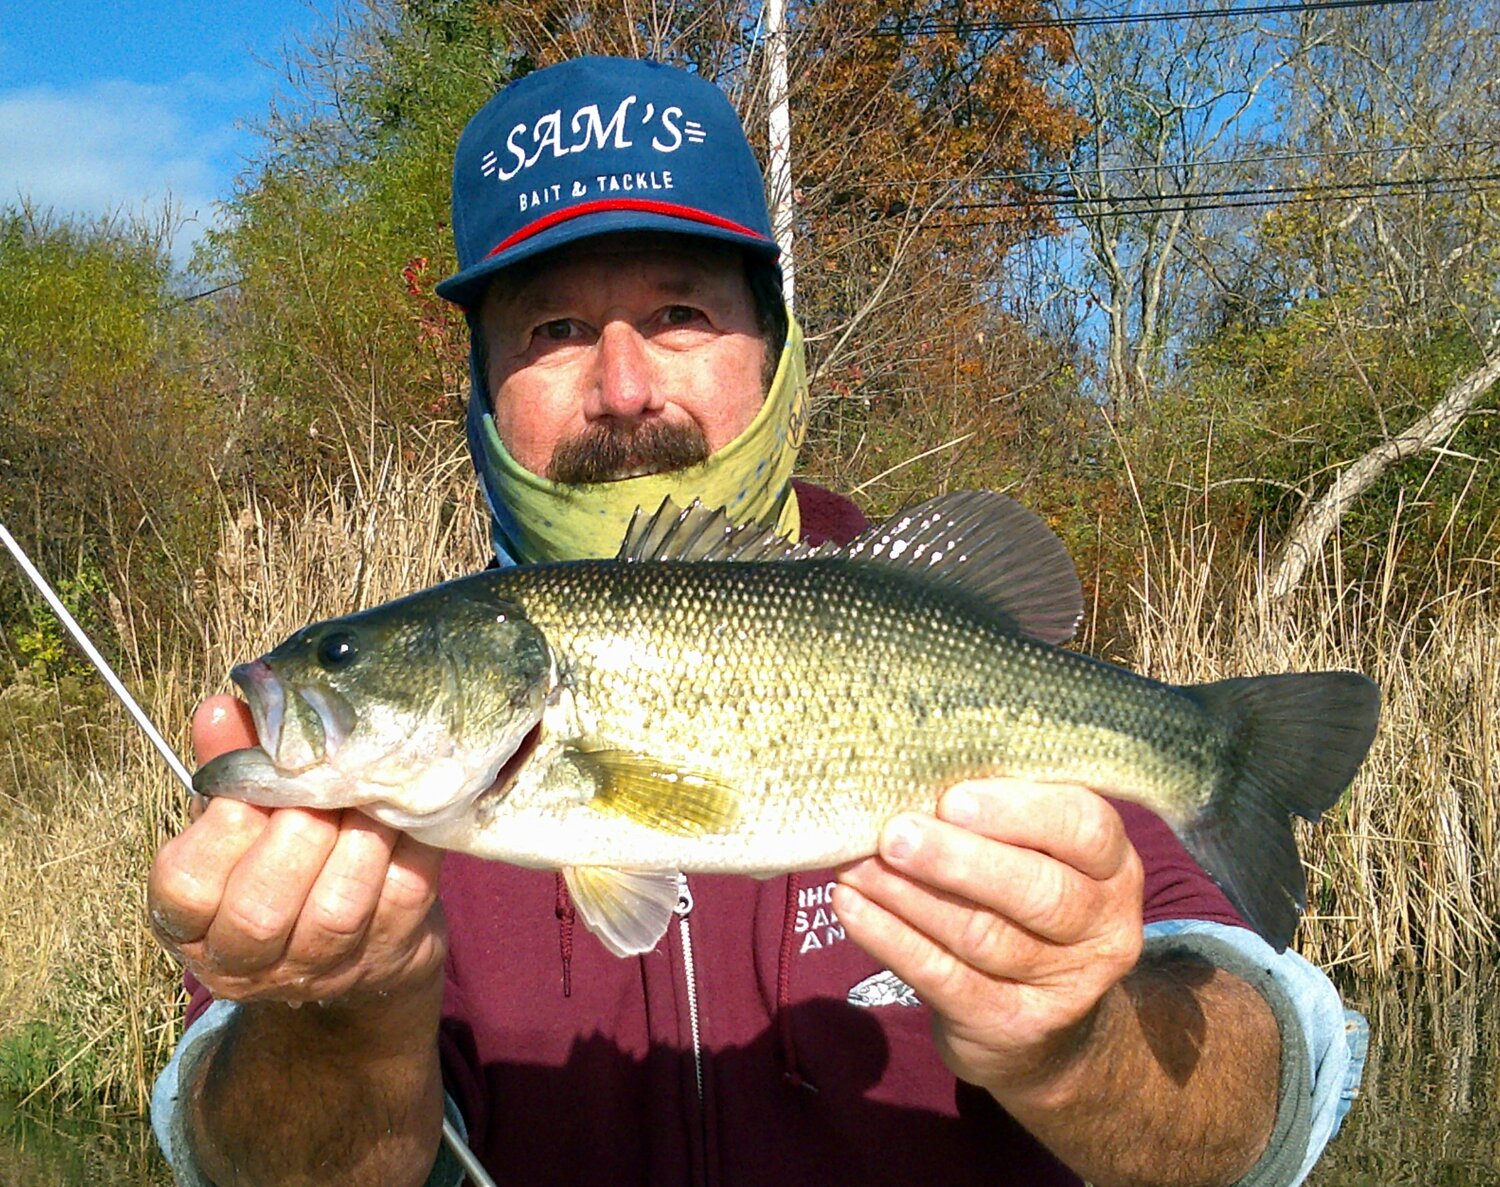 John Migliori with an Aquidneck Island largemouth bass: “Sunday morning I caught this nice, 17-inch largemouth using a Kastmaster lure.”